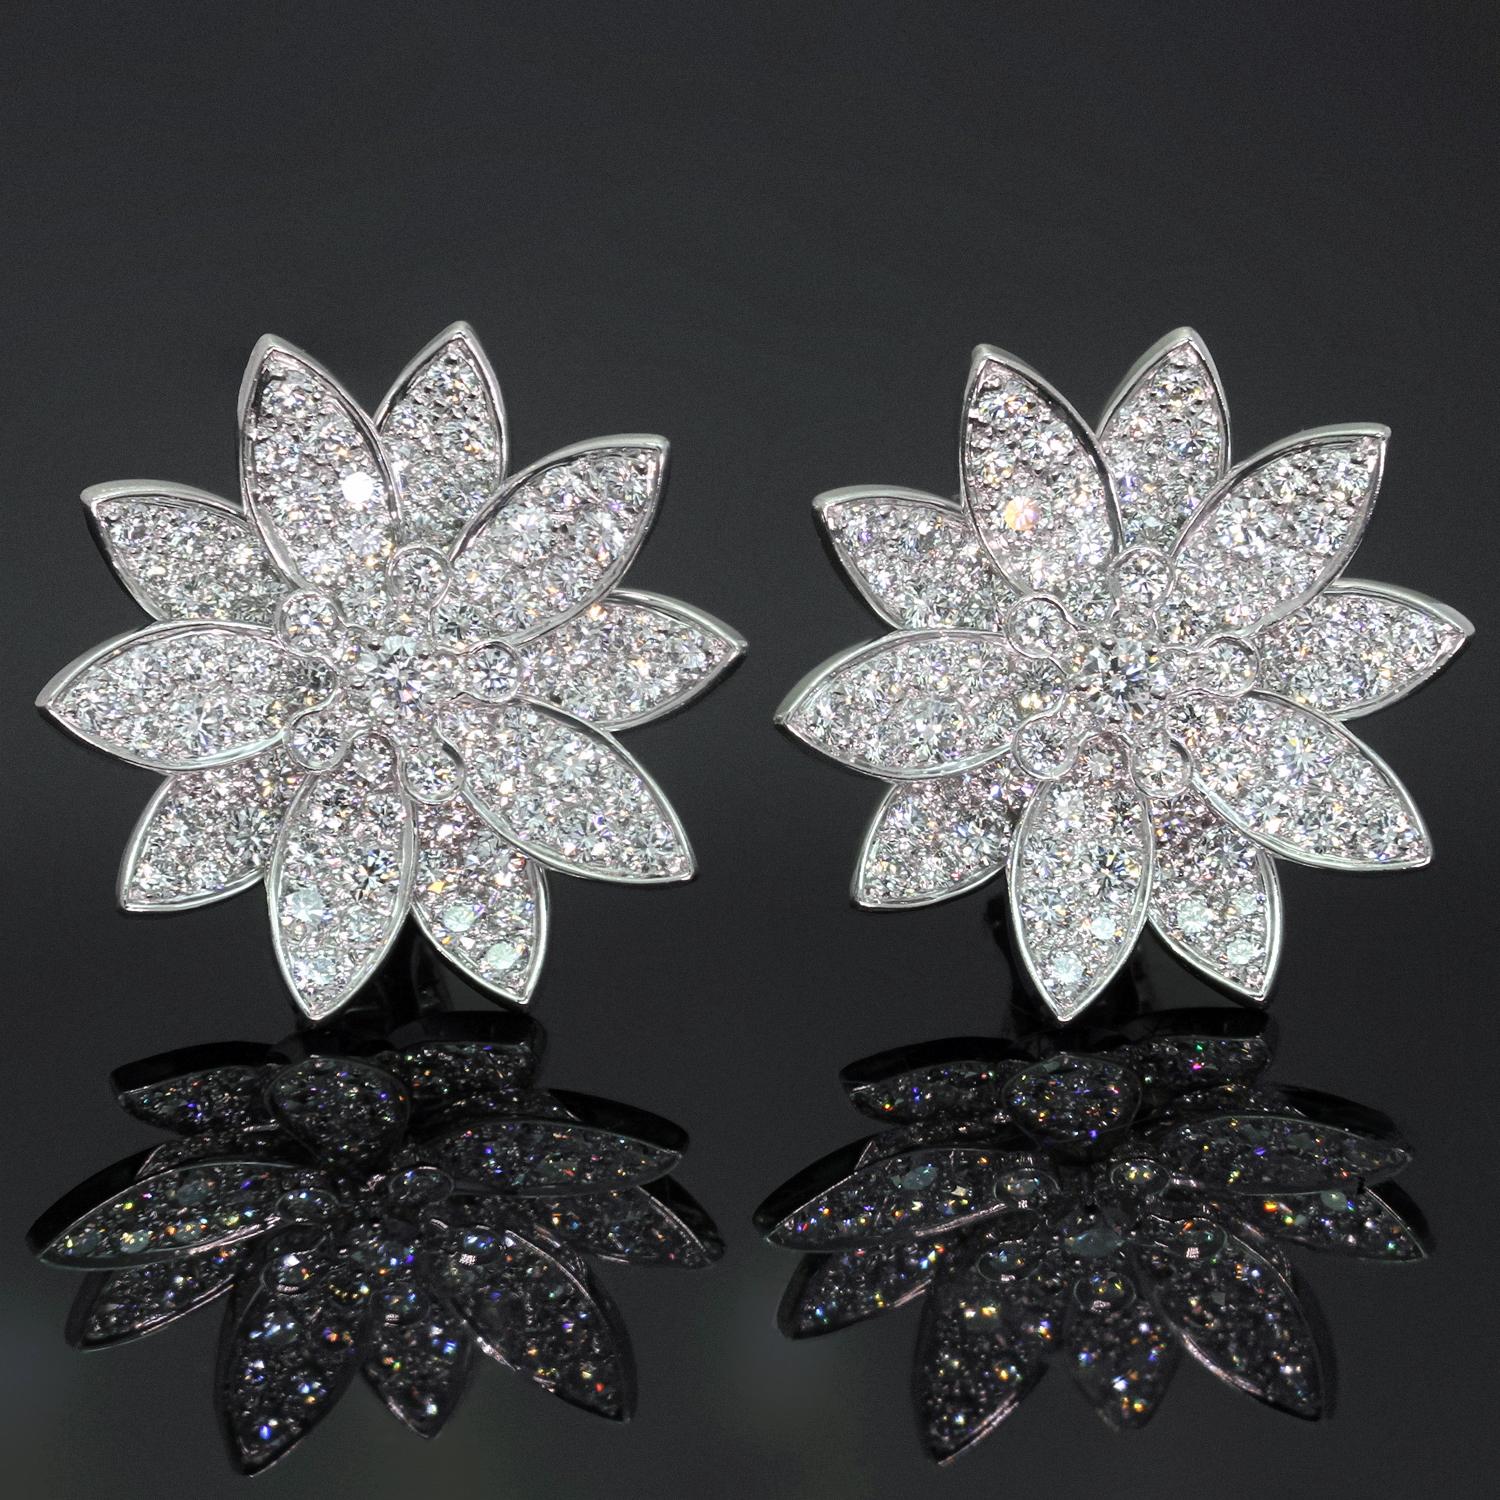 These magnificent floral earrings from the iconic Lotus collection by Van Cleef & Arpels are crafted in 18k white gold and pave-set with round brilliant D-F VVS1-VVS2 diamonds weighing an estimated 3.30 carats Made in France circa 2010s.